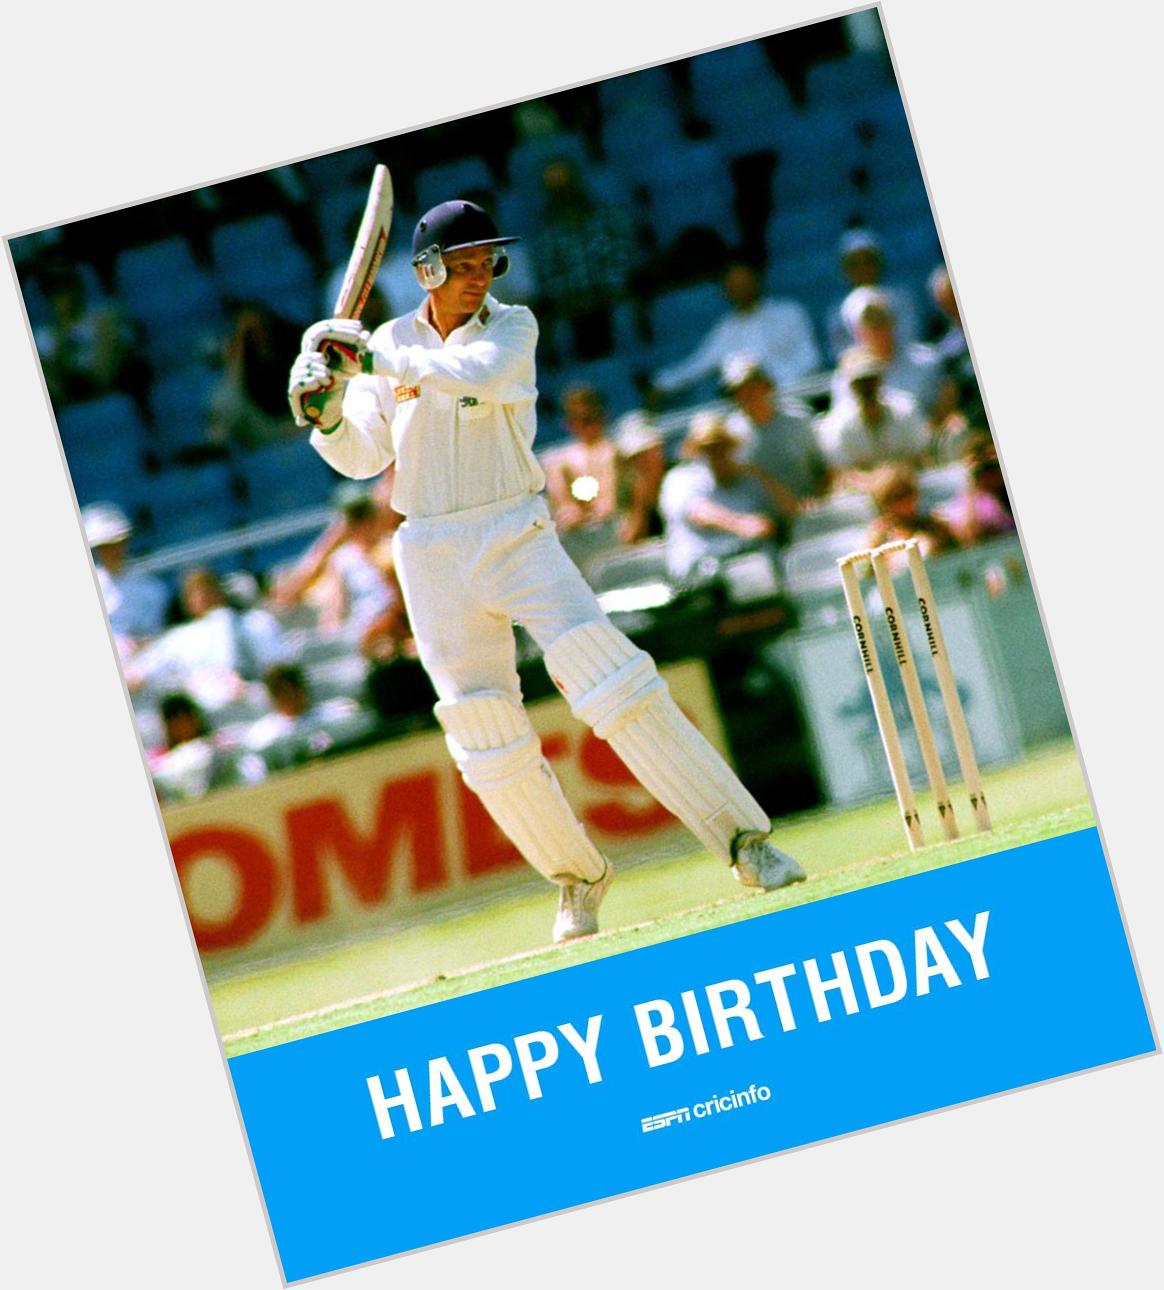  Happy birthday to David Gower! Is he among your favourite batsmen of all time? 

 